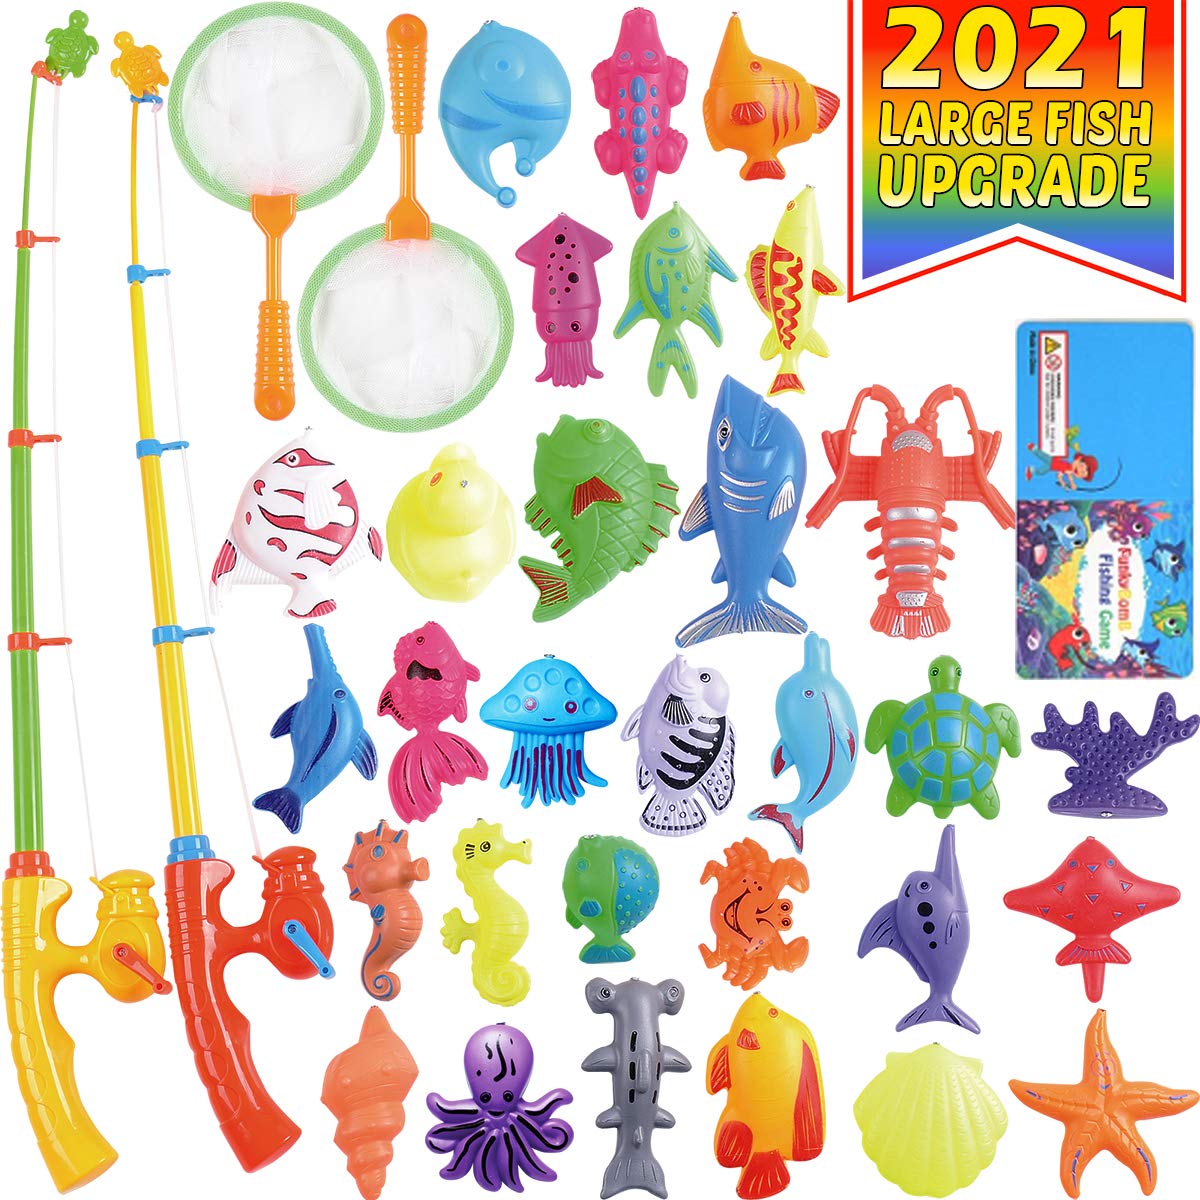 CozyBomB Magnetic Fishing Pool Toys Game for Kids - Water Table Bathtub Kiddie Party Toy with Pole Rod Net Plastic Floating Fish Toddler Color Ocean Sea Animals Age 3 4 5 6 Year Old